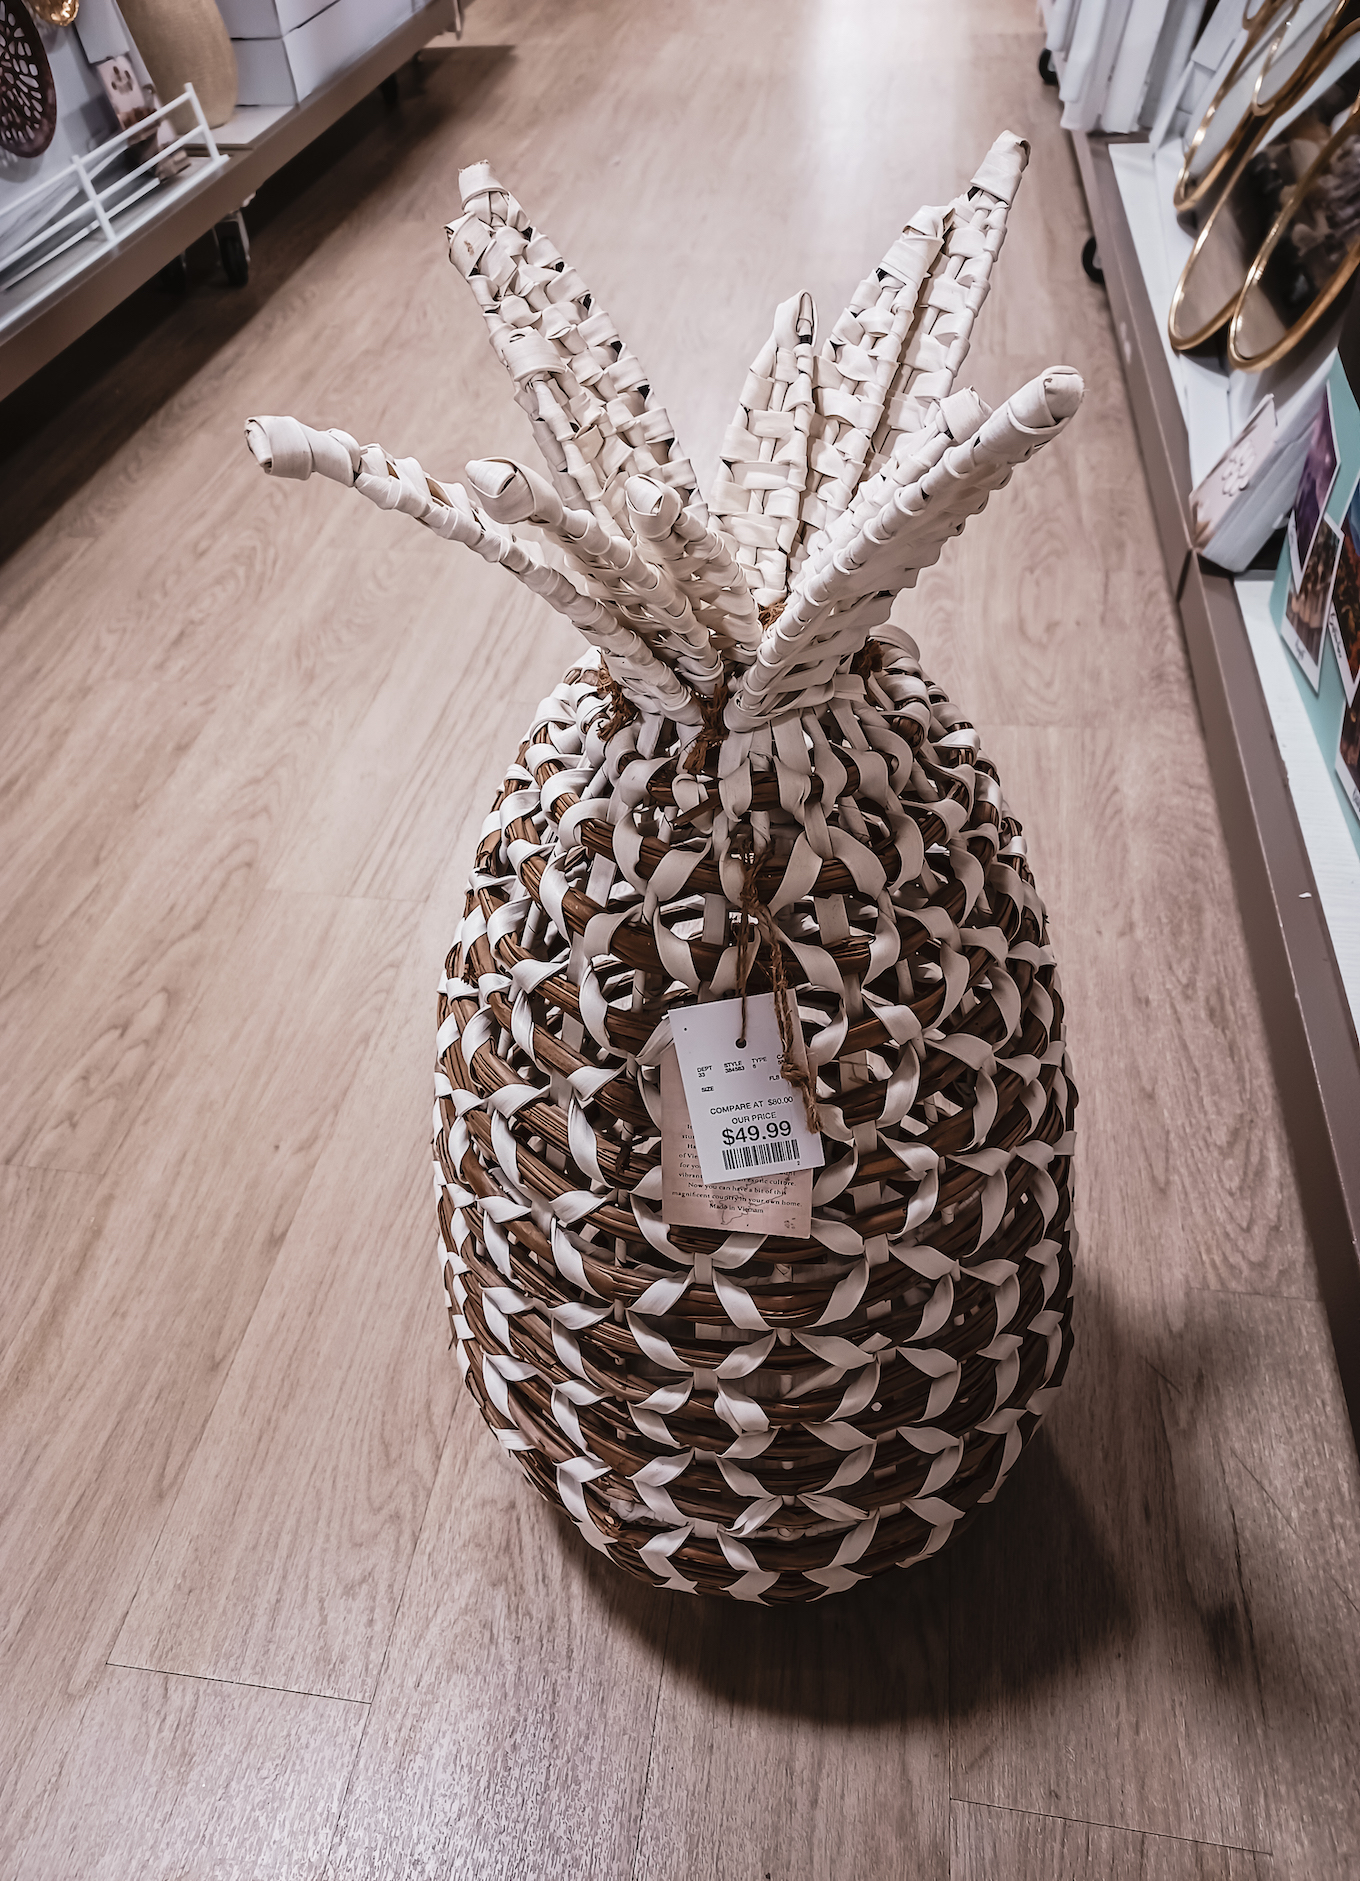 Juicy fruit. An adorable wicker pineapple at HomeGoods.